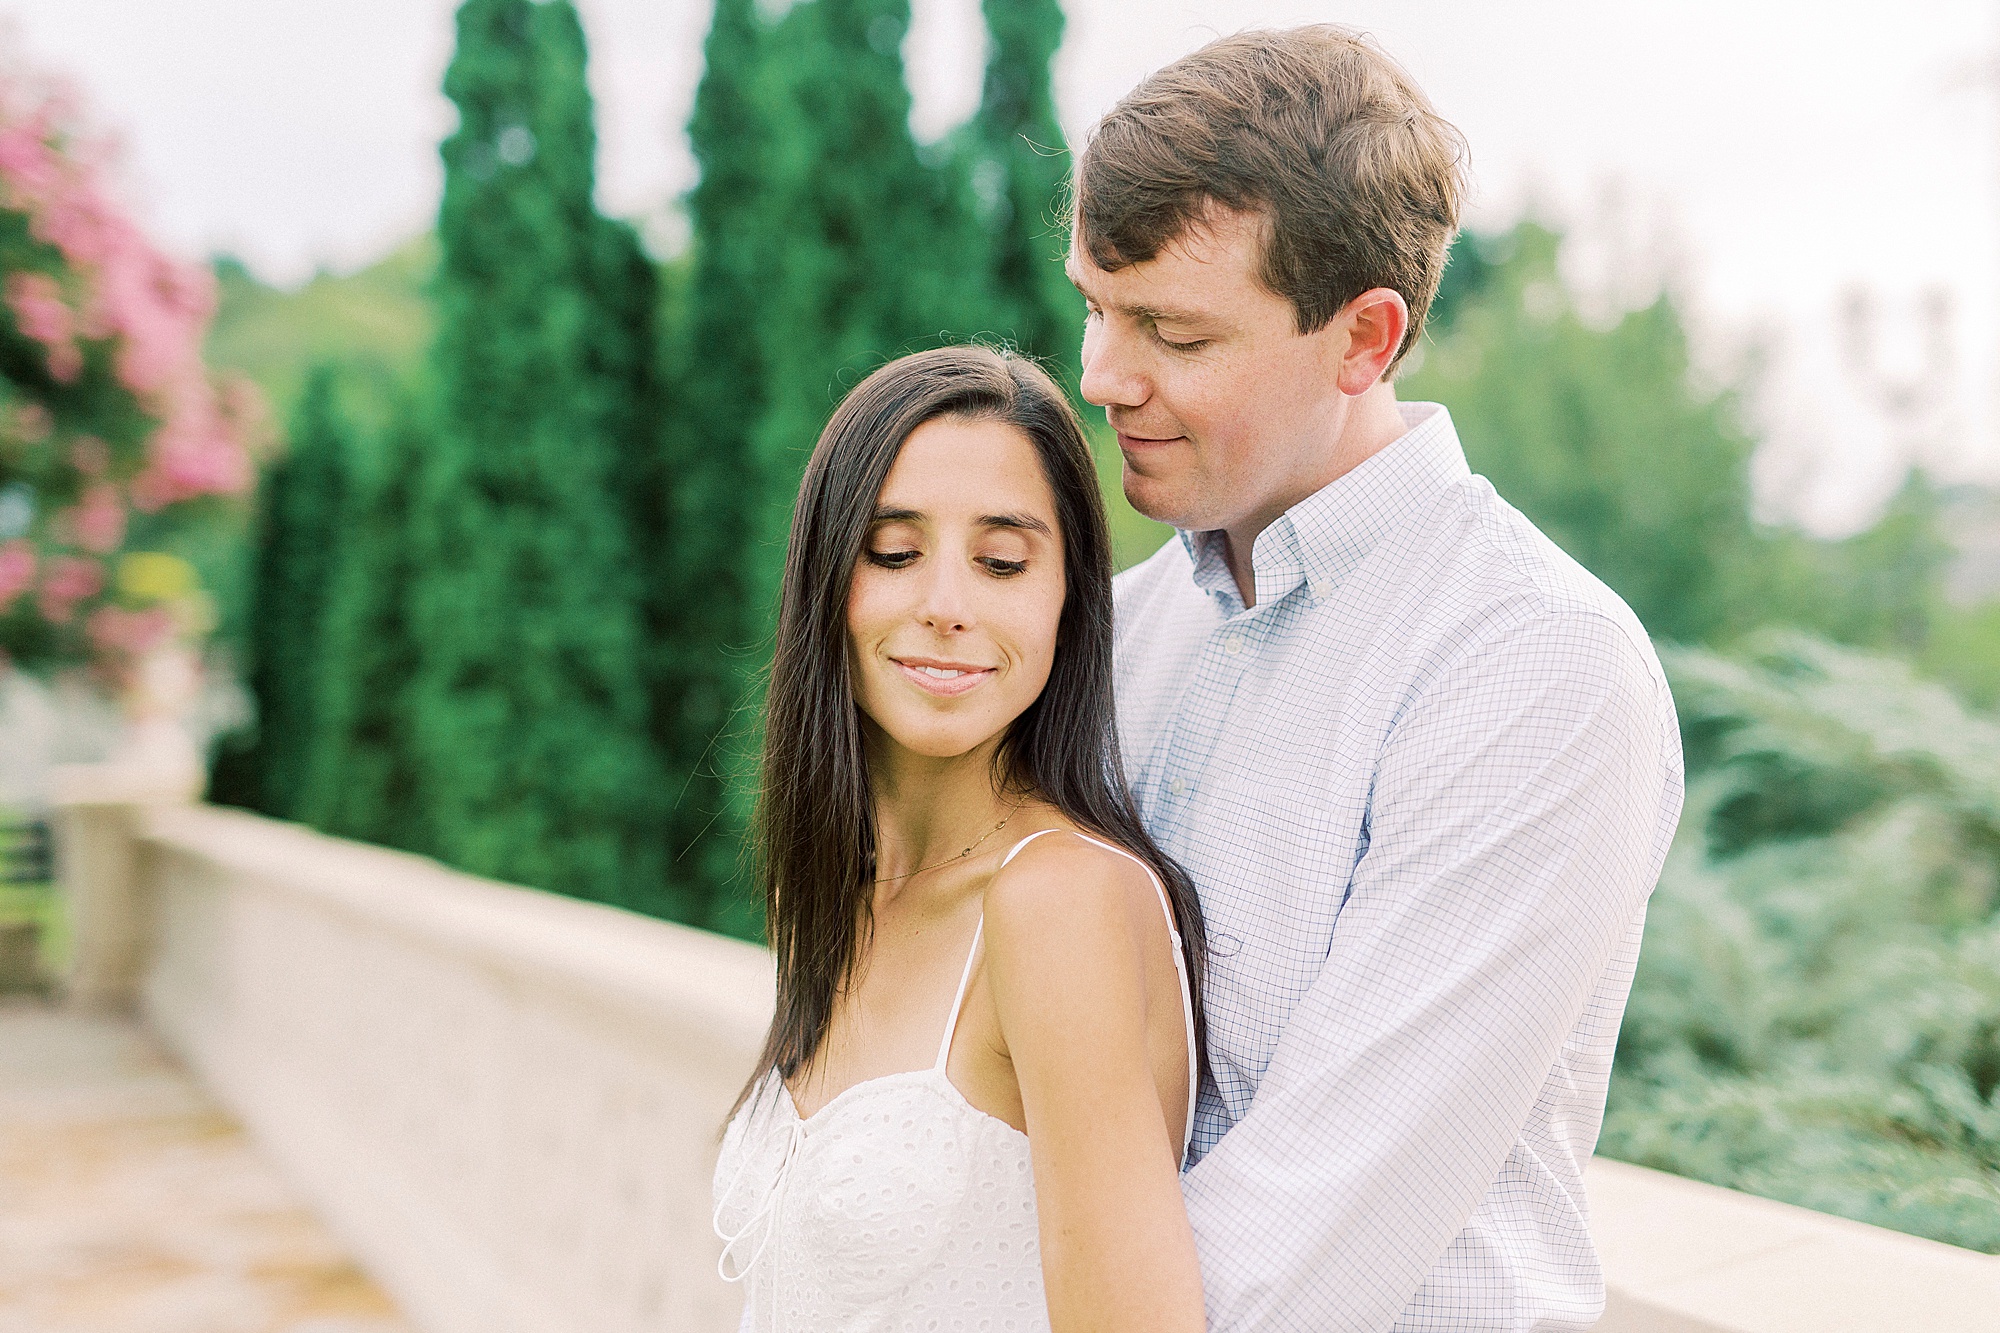 groom looks down at bride during engagement photos in the park